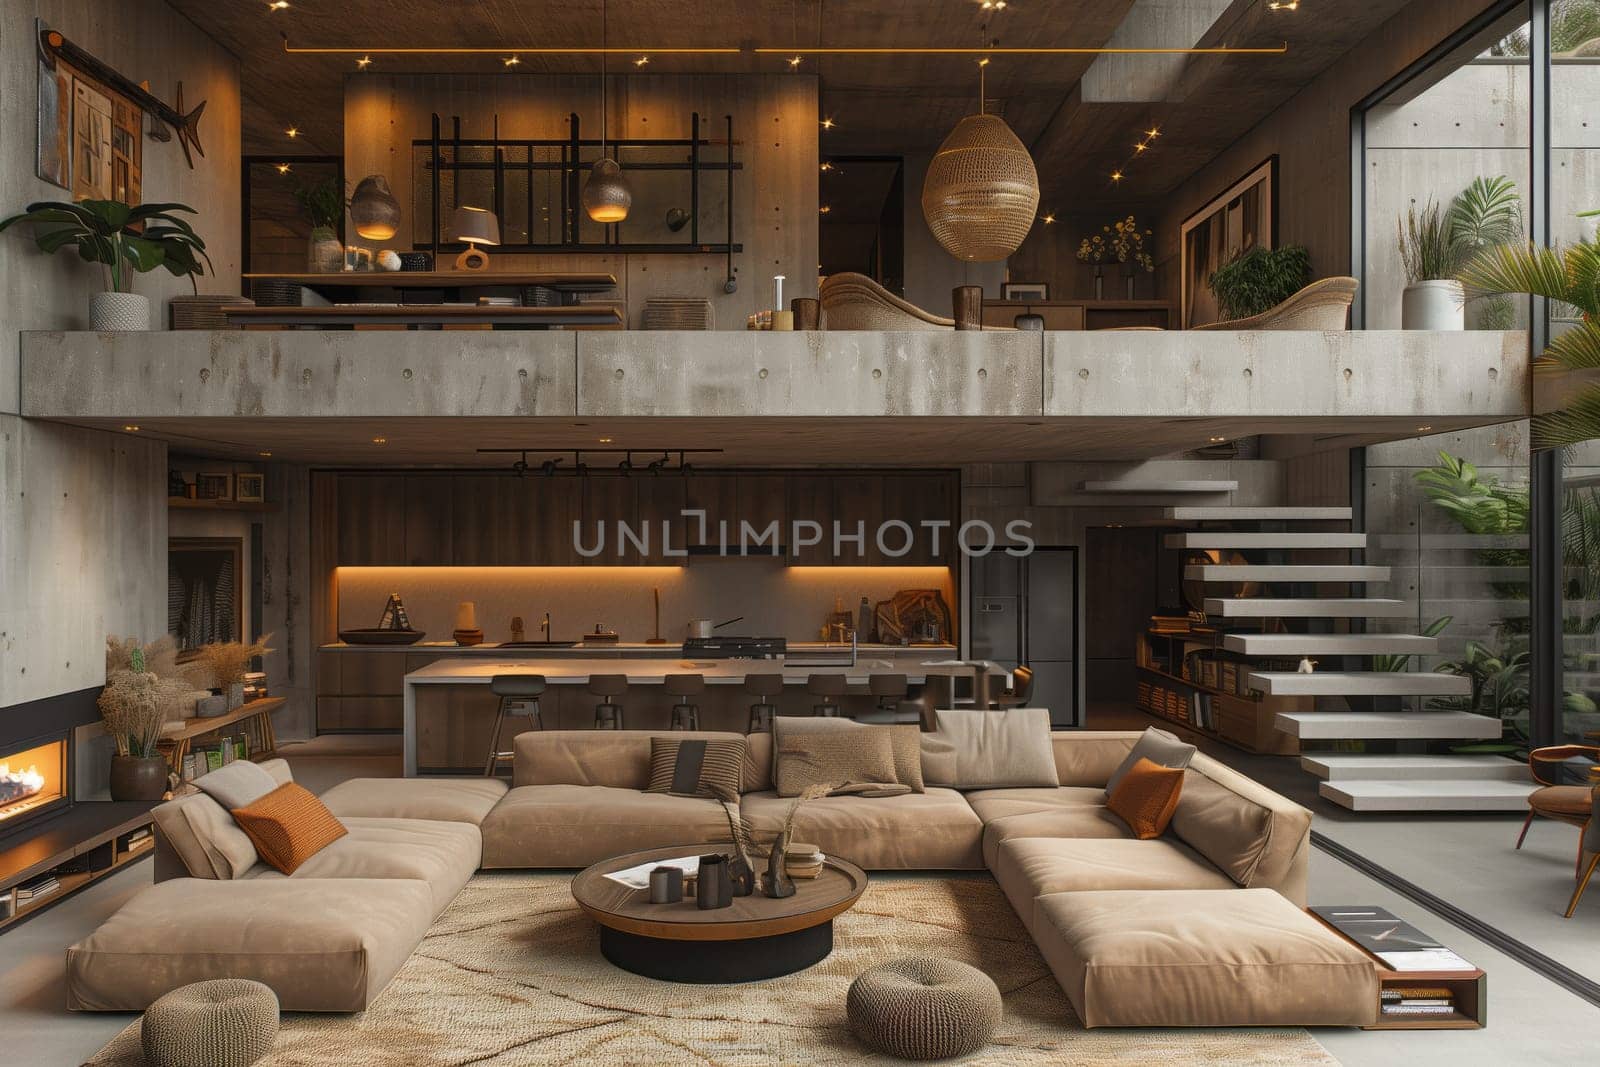 A spacious living room in a house with a large sectional couch and hardwood stairs leading up to the second floor, showcasing a beautiful interior design